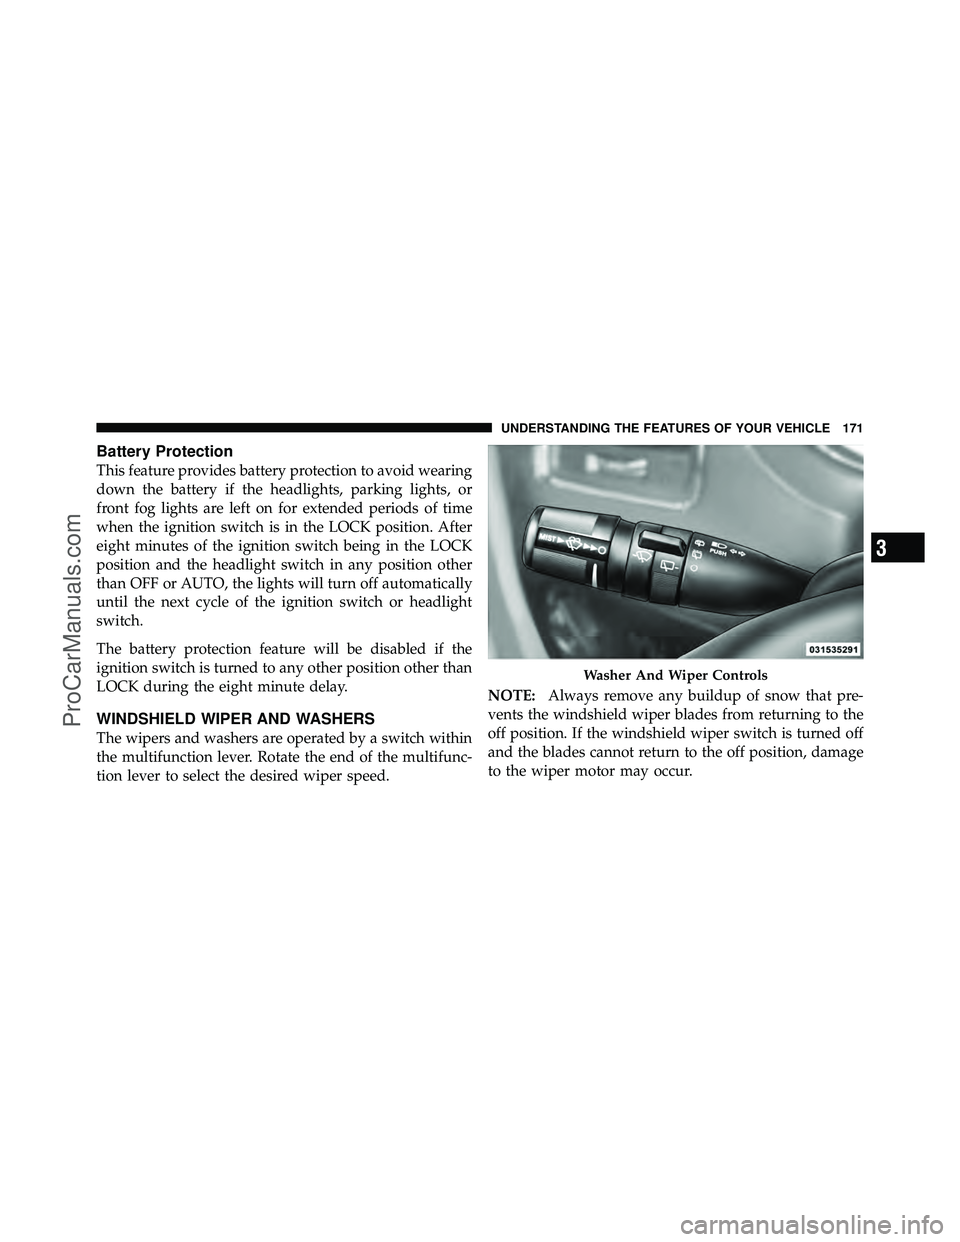 DODGE CARAVAN 2011  Owners Manual Battery Protection
This feature provides battery protection to avoid wearing
down the battery if the headlights, parking lights, or
front fog lights are left on for extended periods of time
when the i